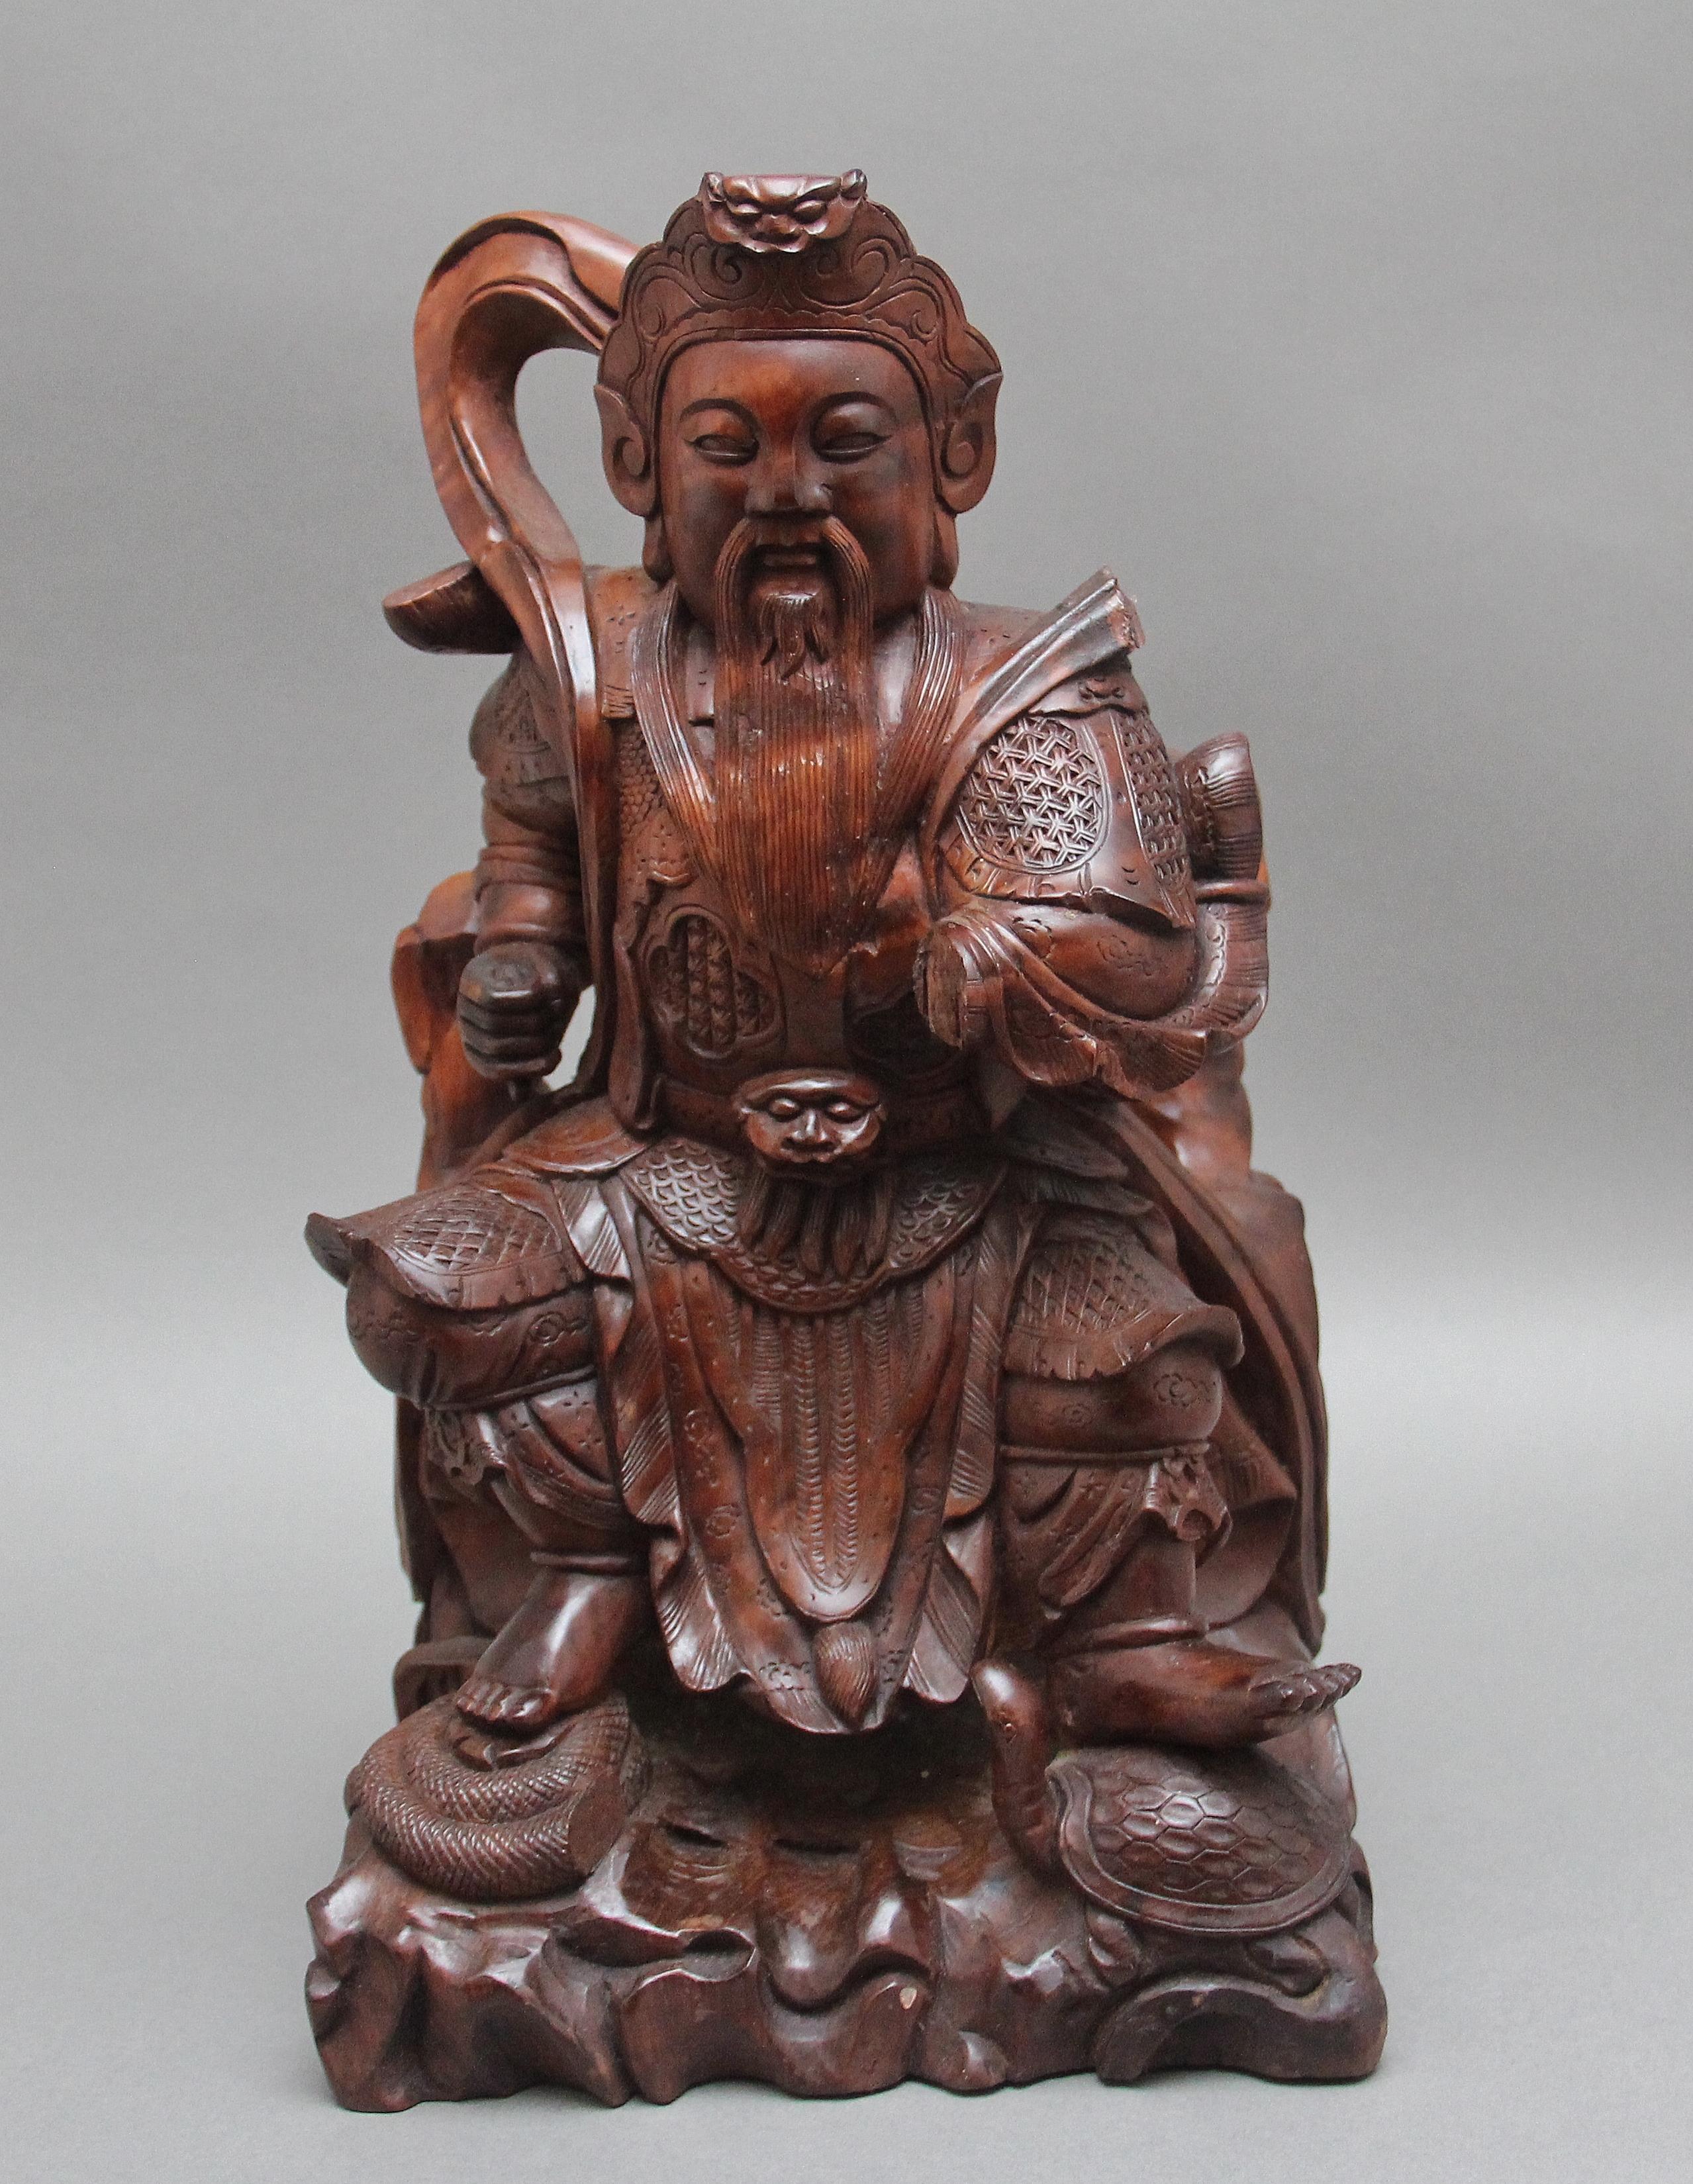 19th Century mahogany Chinese root carving of a seated ancient warrior, very detailed and nicely carved.  Circa 1880.  Damage to left arm and back of the figure.